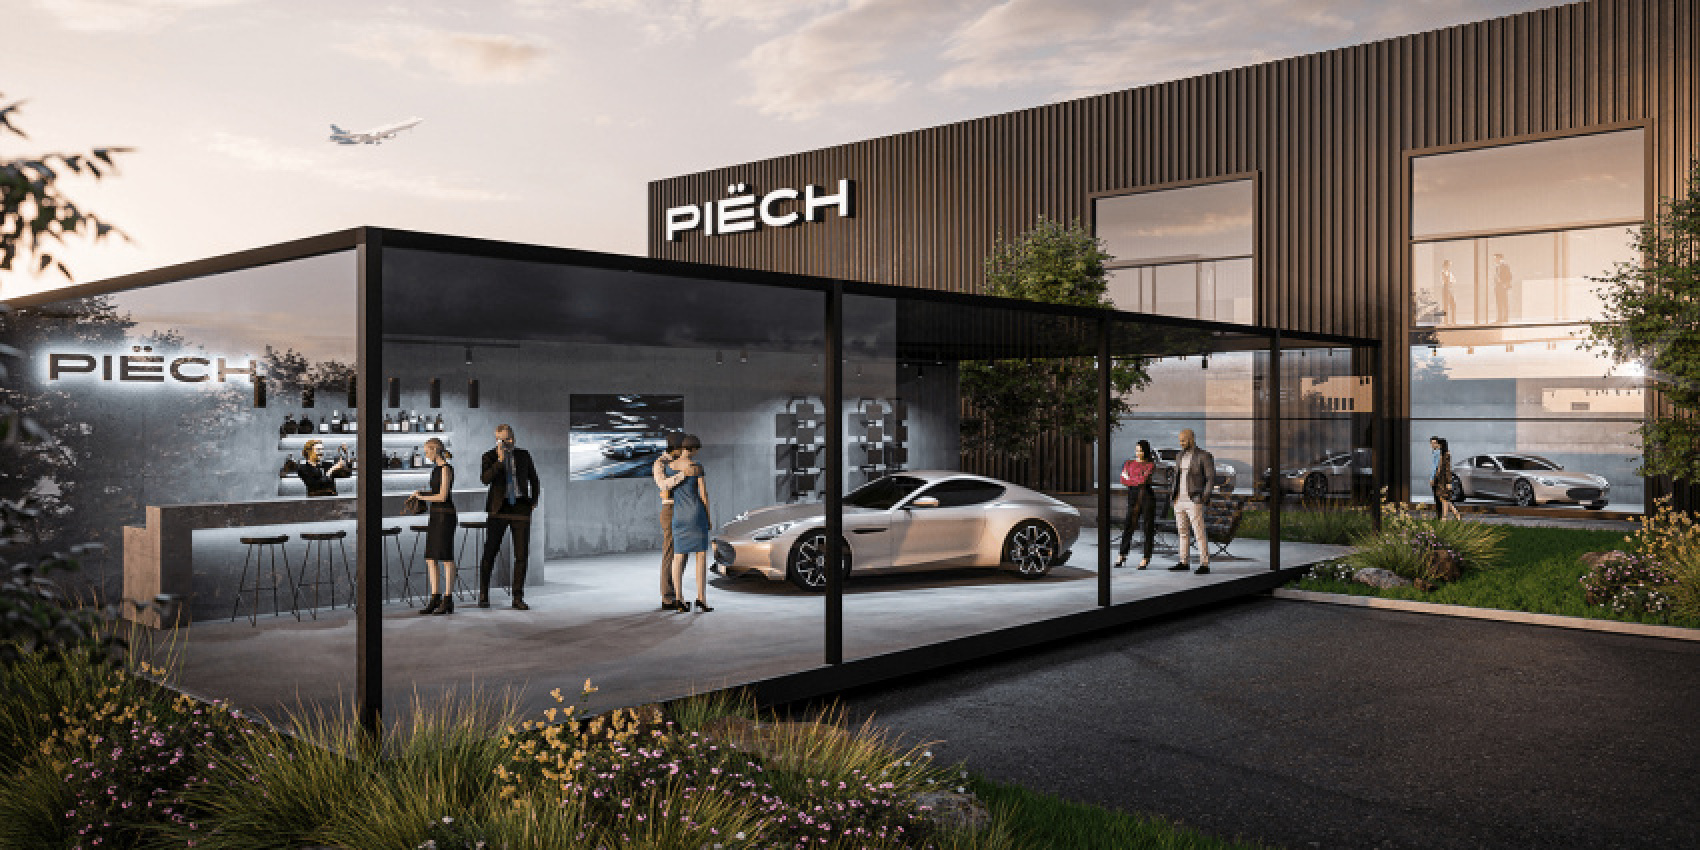 autos, cars, electric vehicle, short circuit, andreas henke, career, jochen rudat, matthias müller, piëch automotive, piëch appears to have trouble with employee retention